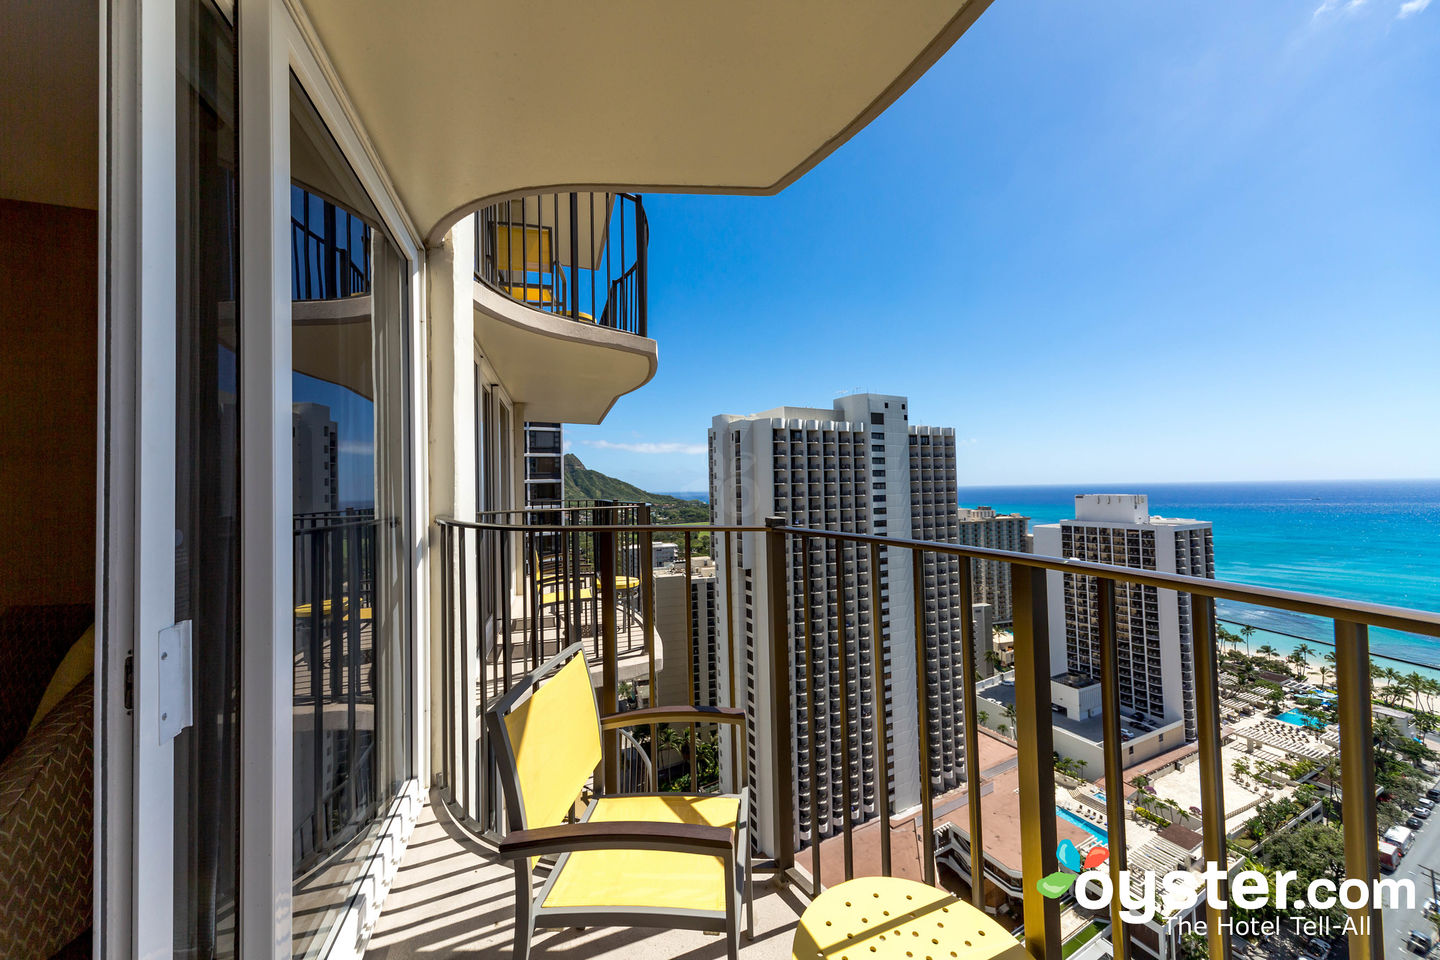 Hilton Waikiki Beach Review: What To REALLY Expect If You Stay